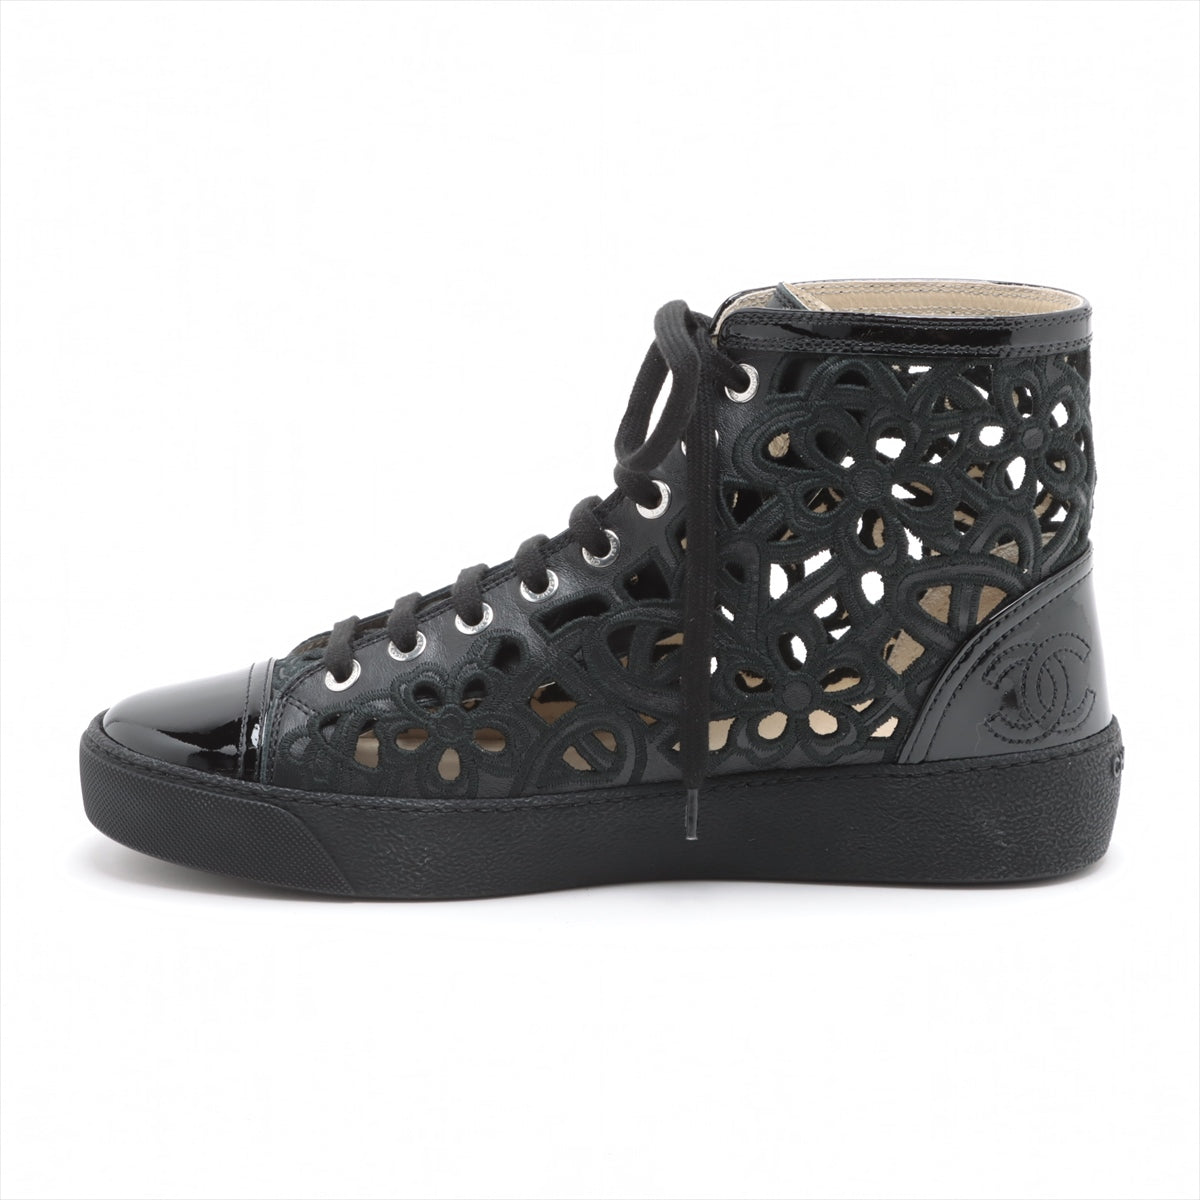 Chanel Coco Mark Leather x fabric High-top Sneakers 38 Ladies' Black floral lace Box Bag Included